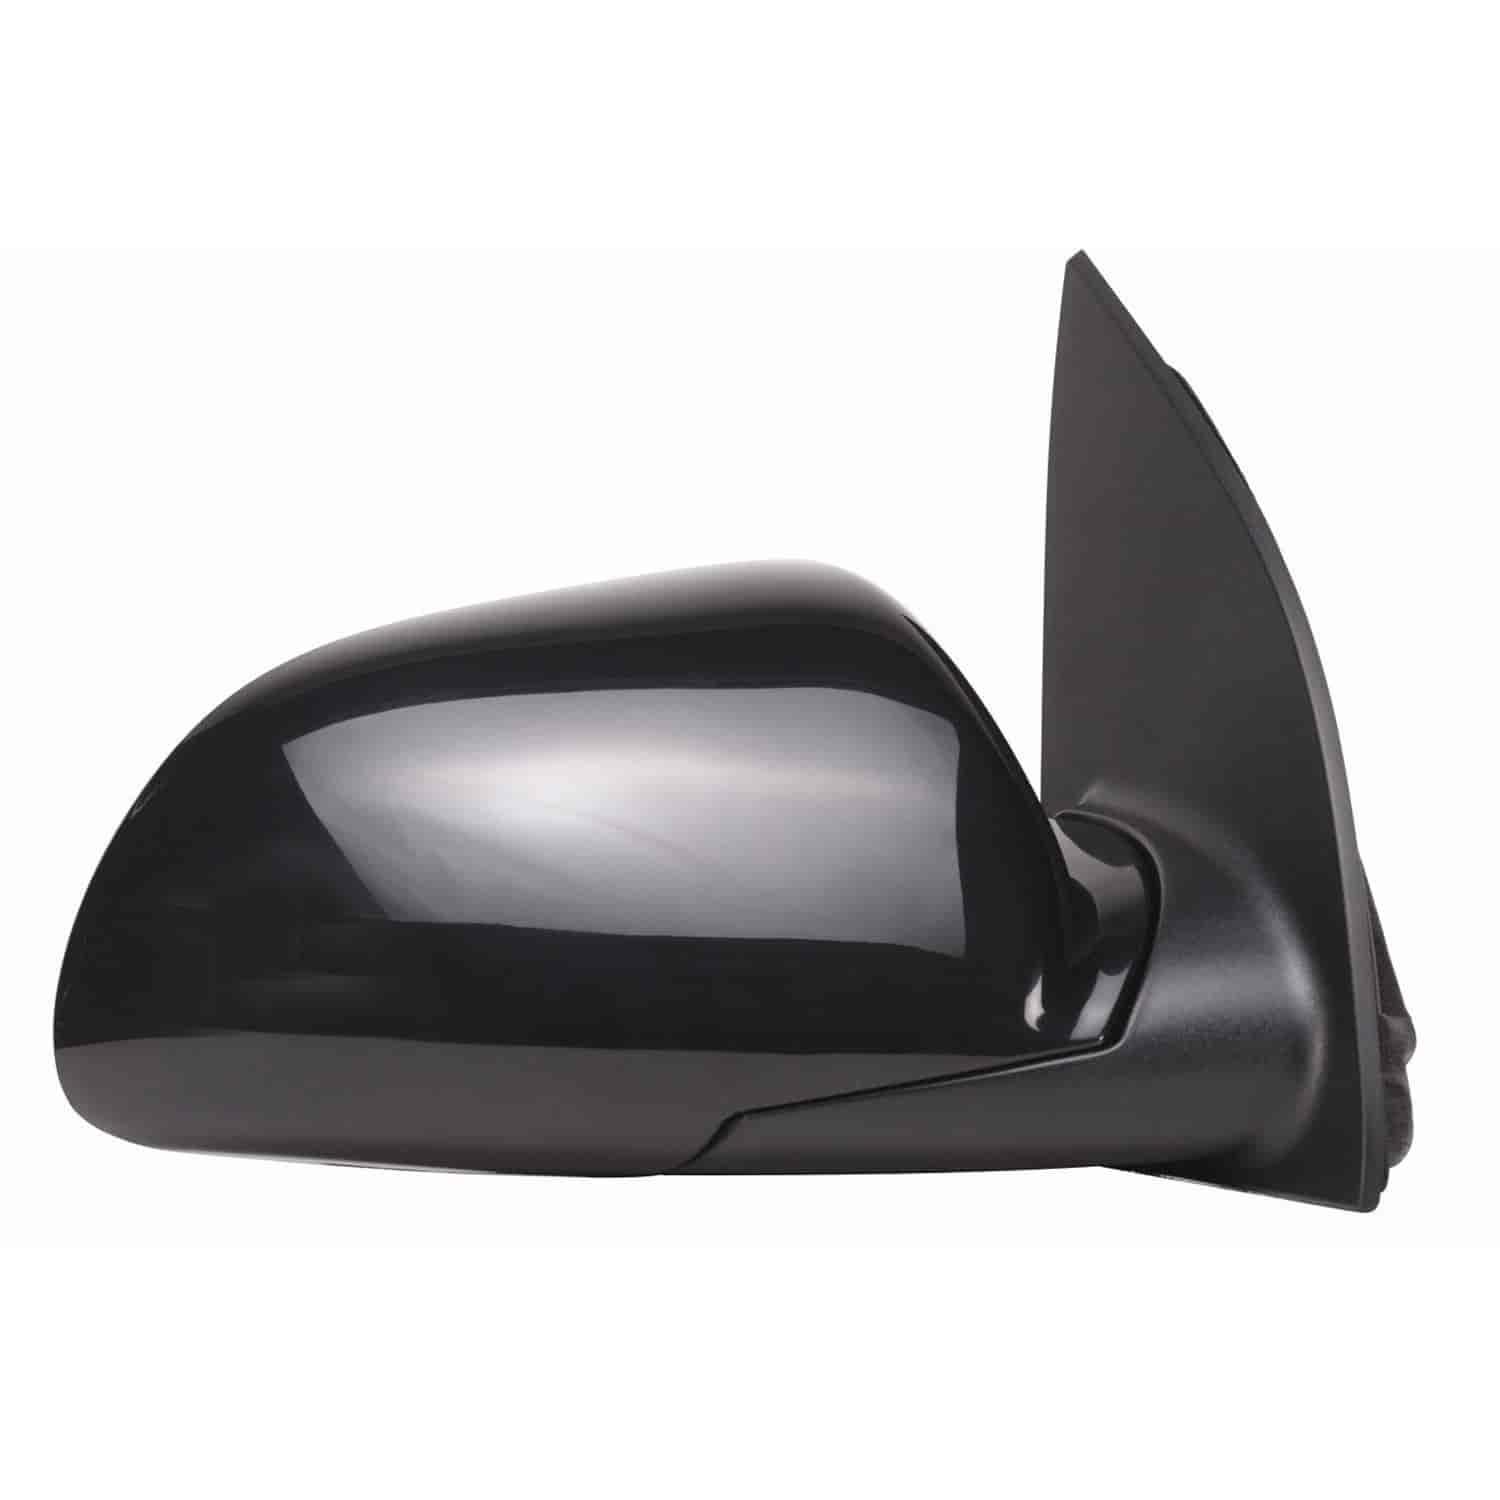 OEM Style Replacement mirror for 04-09 Saturn Vue